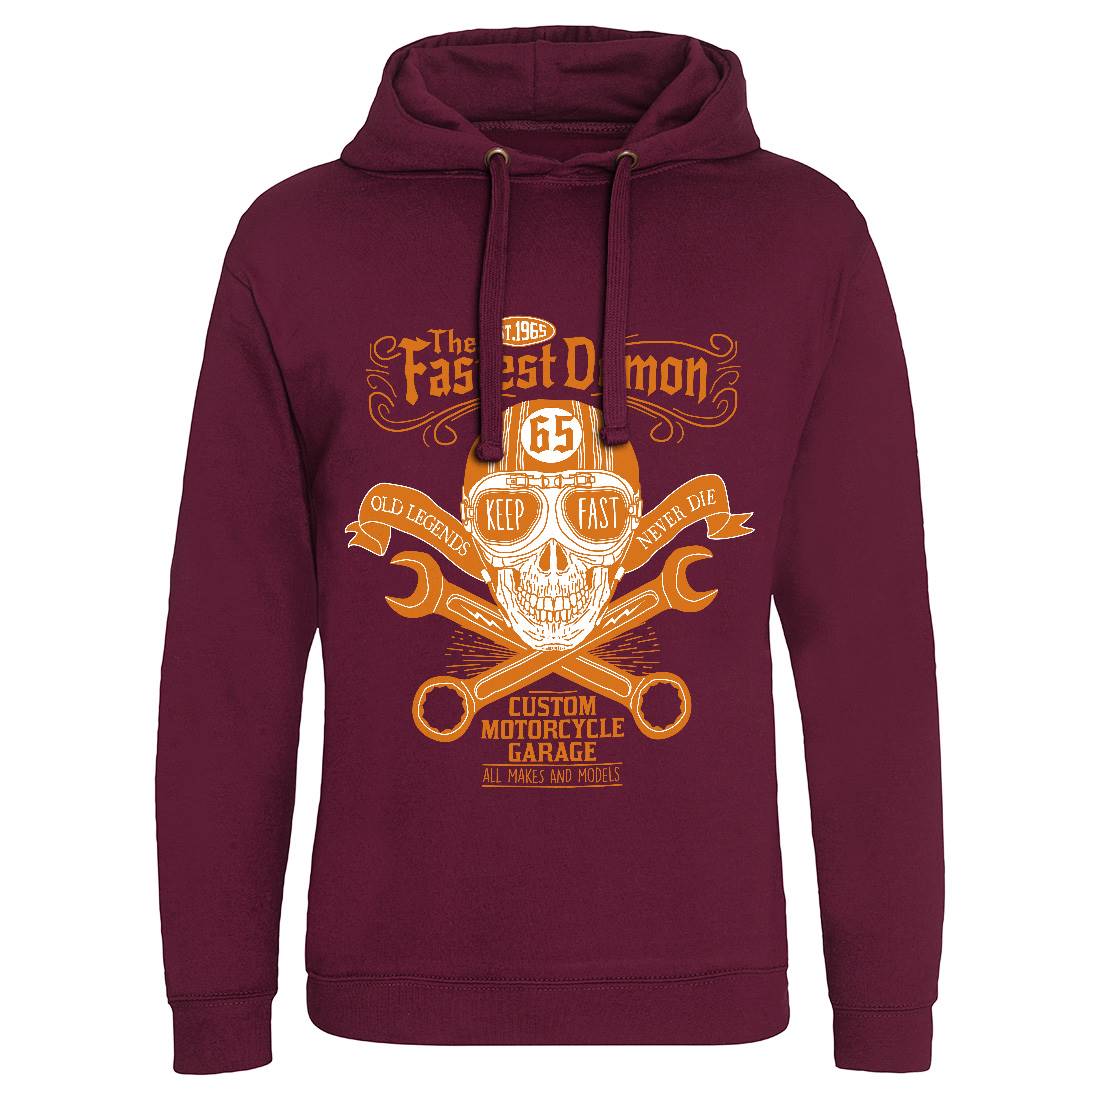 Fastest Demon Mens Hoodie Without Pocket Motorcycles A993